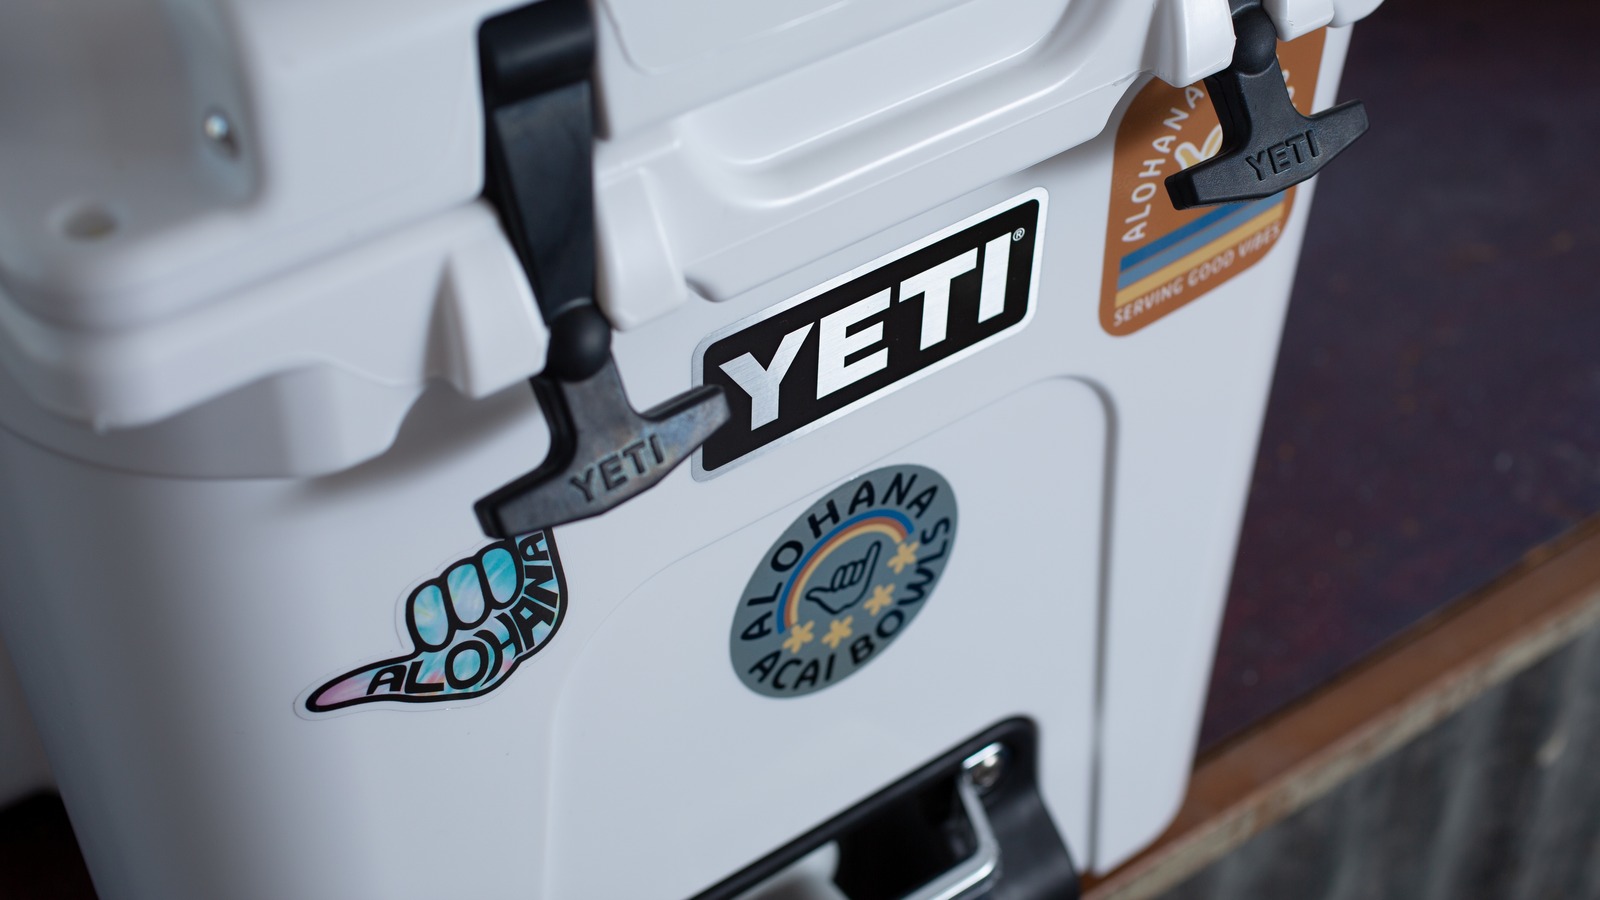 YETI Is Recalling Almost 2 Million Coolers And Other Products – Tasting Table